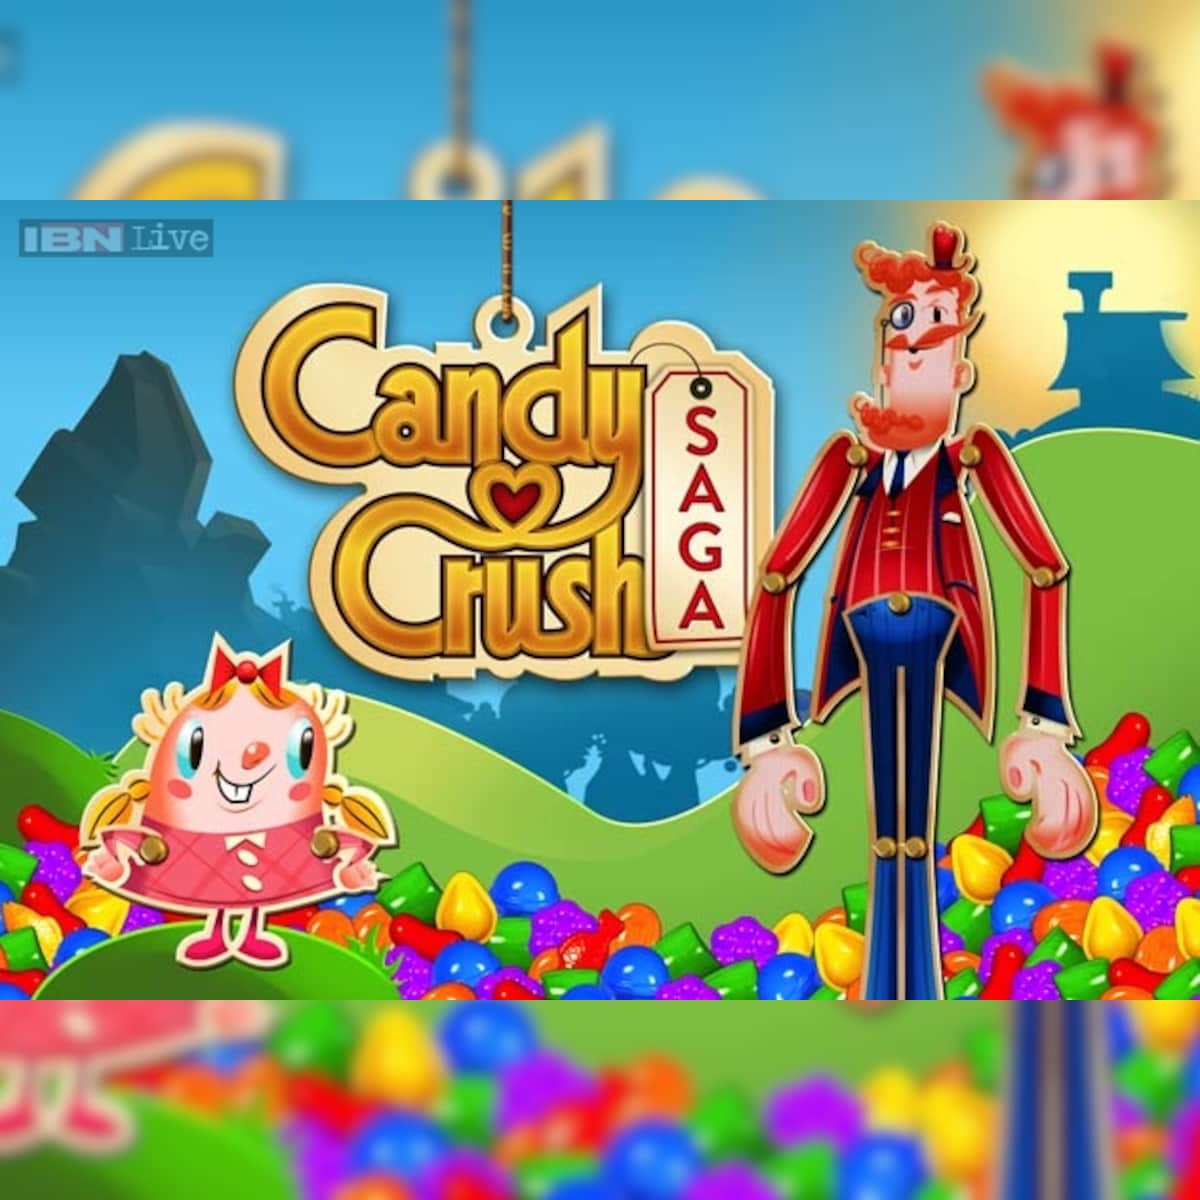 candy crush saga game review: maddeningly addictive, takes away family time